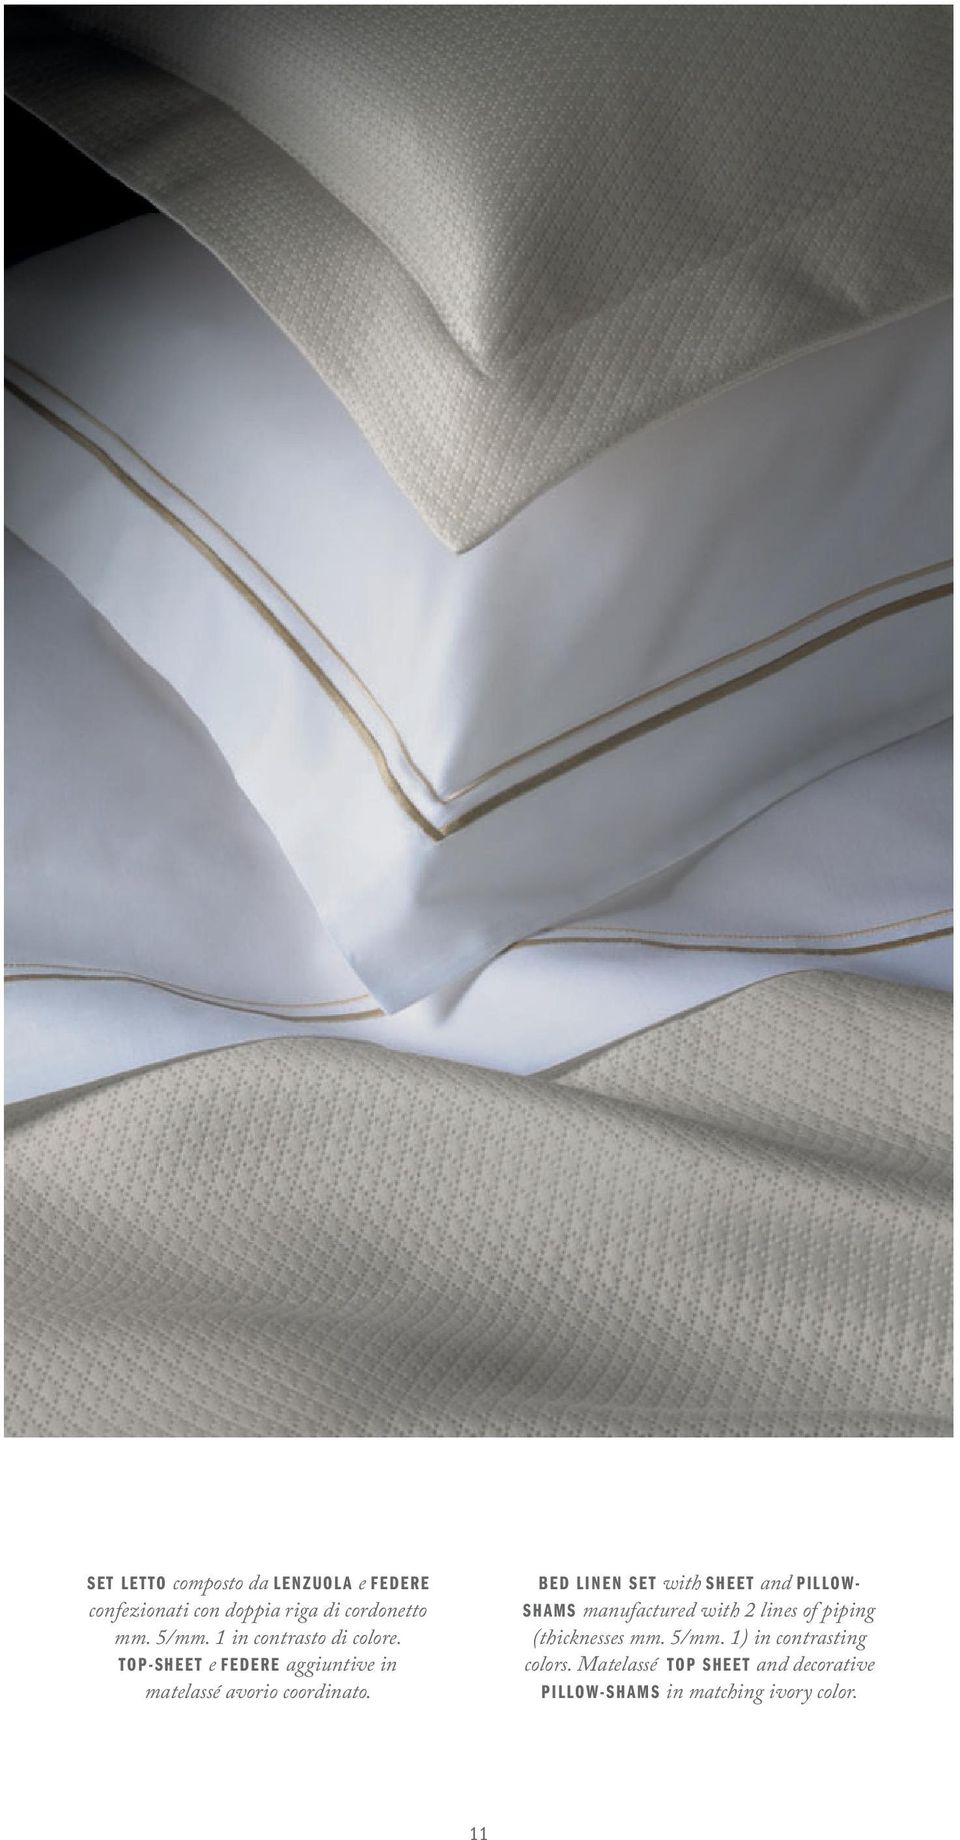 BED LINEN SET with SHEET and PILLOW- SHAMS manufactured with 2 lines of piping (thicknesses mm.